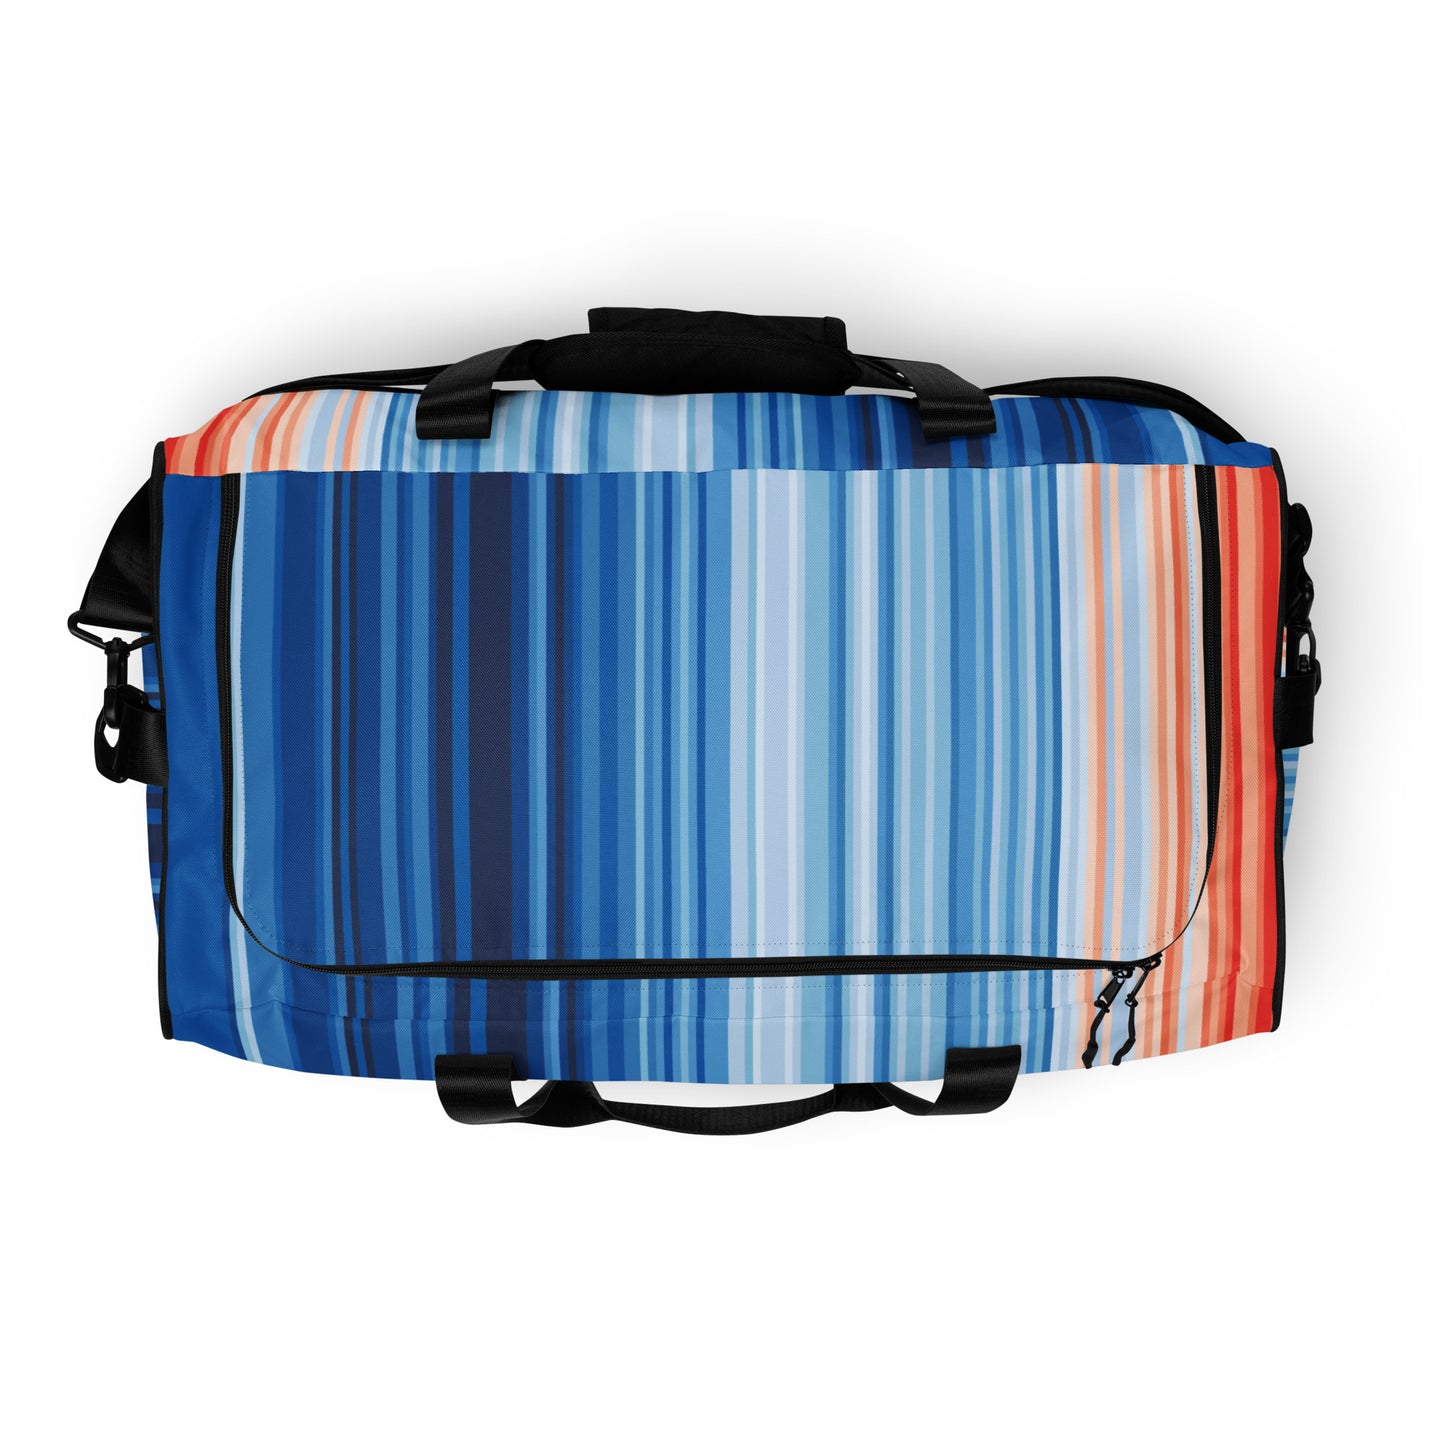 Climate Change Global Warming Stripes - Sustainably Made Duffle Bag